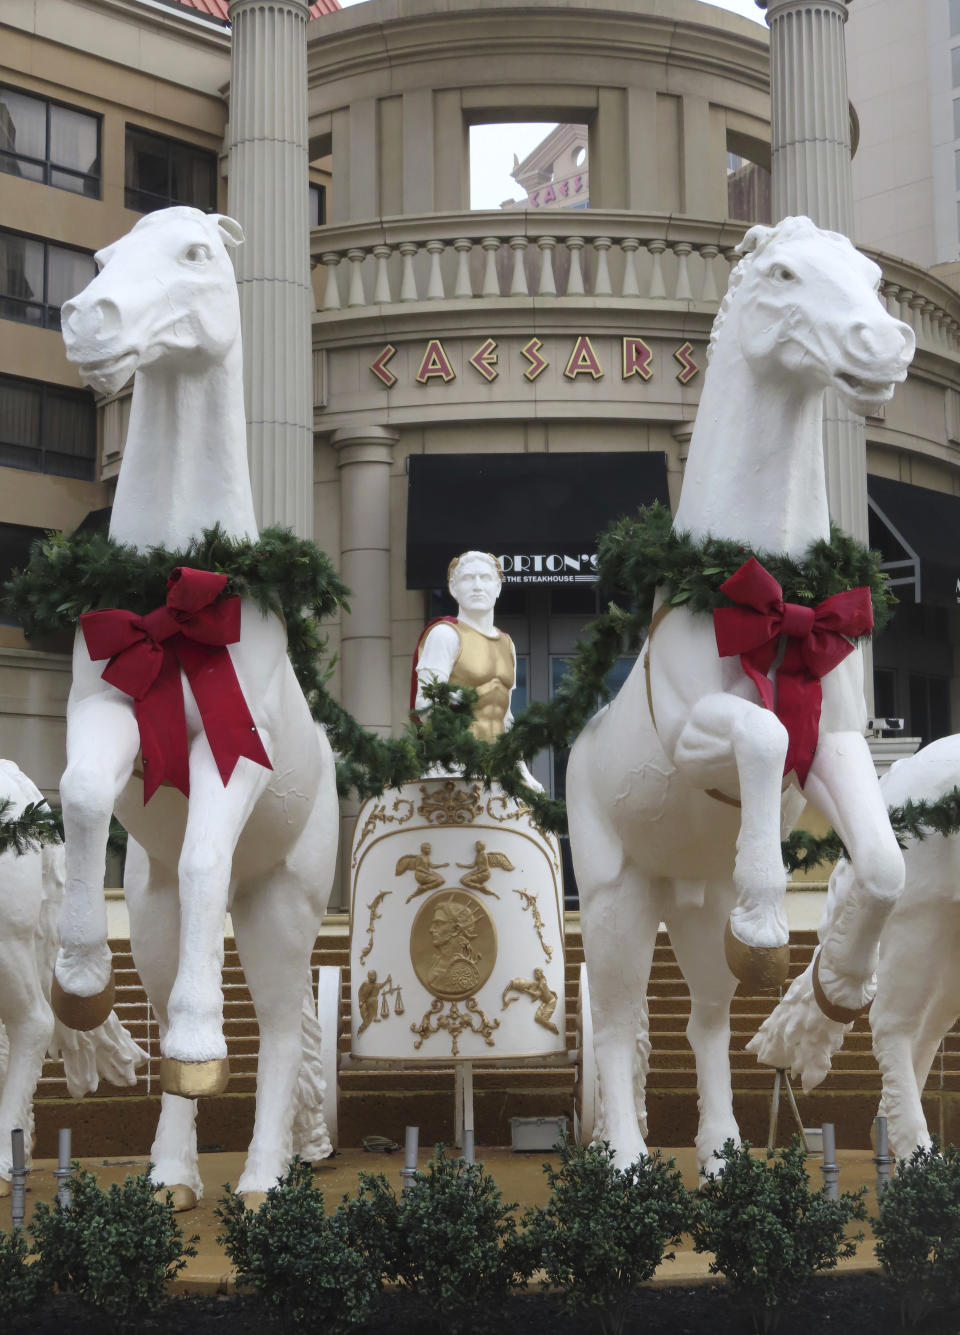 Holiday decorations adorn the sculptures outside Caesars casino in Atlantic City, N.J. on Dec. 28, 2023. Atlantic City faces challenges in the new year including a potential smoking ban in its nine casinos, and their quest to return to pre-pandemic business levels. (AP Photo/Wayne Parry)